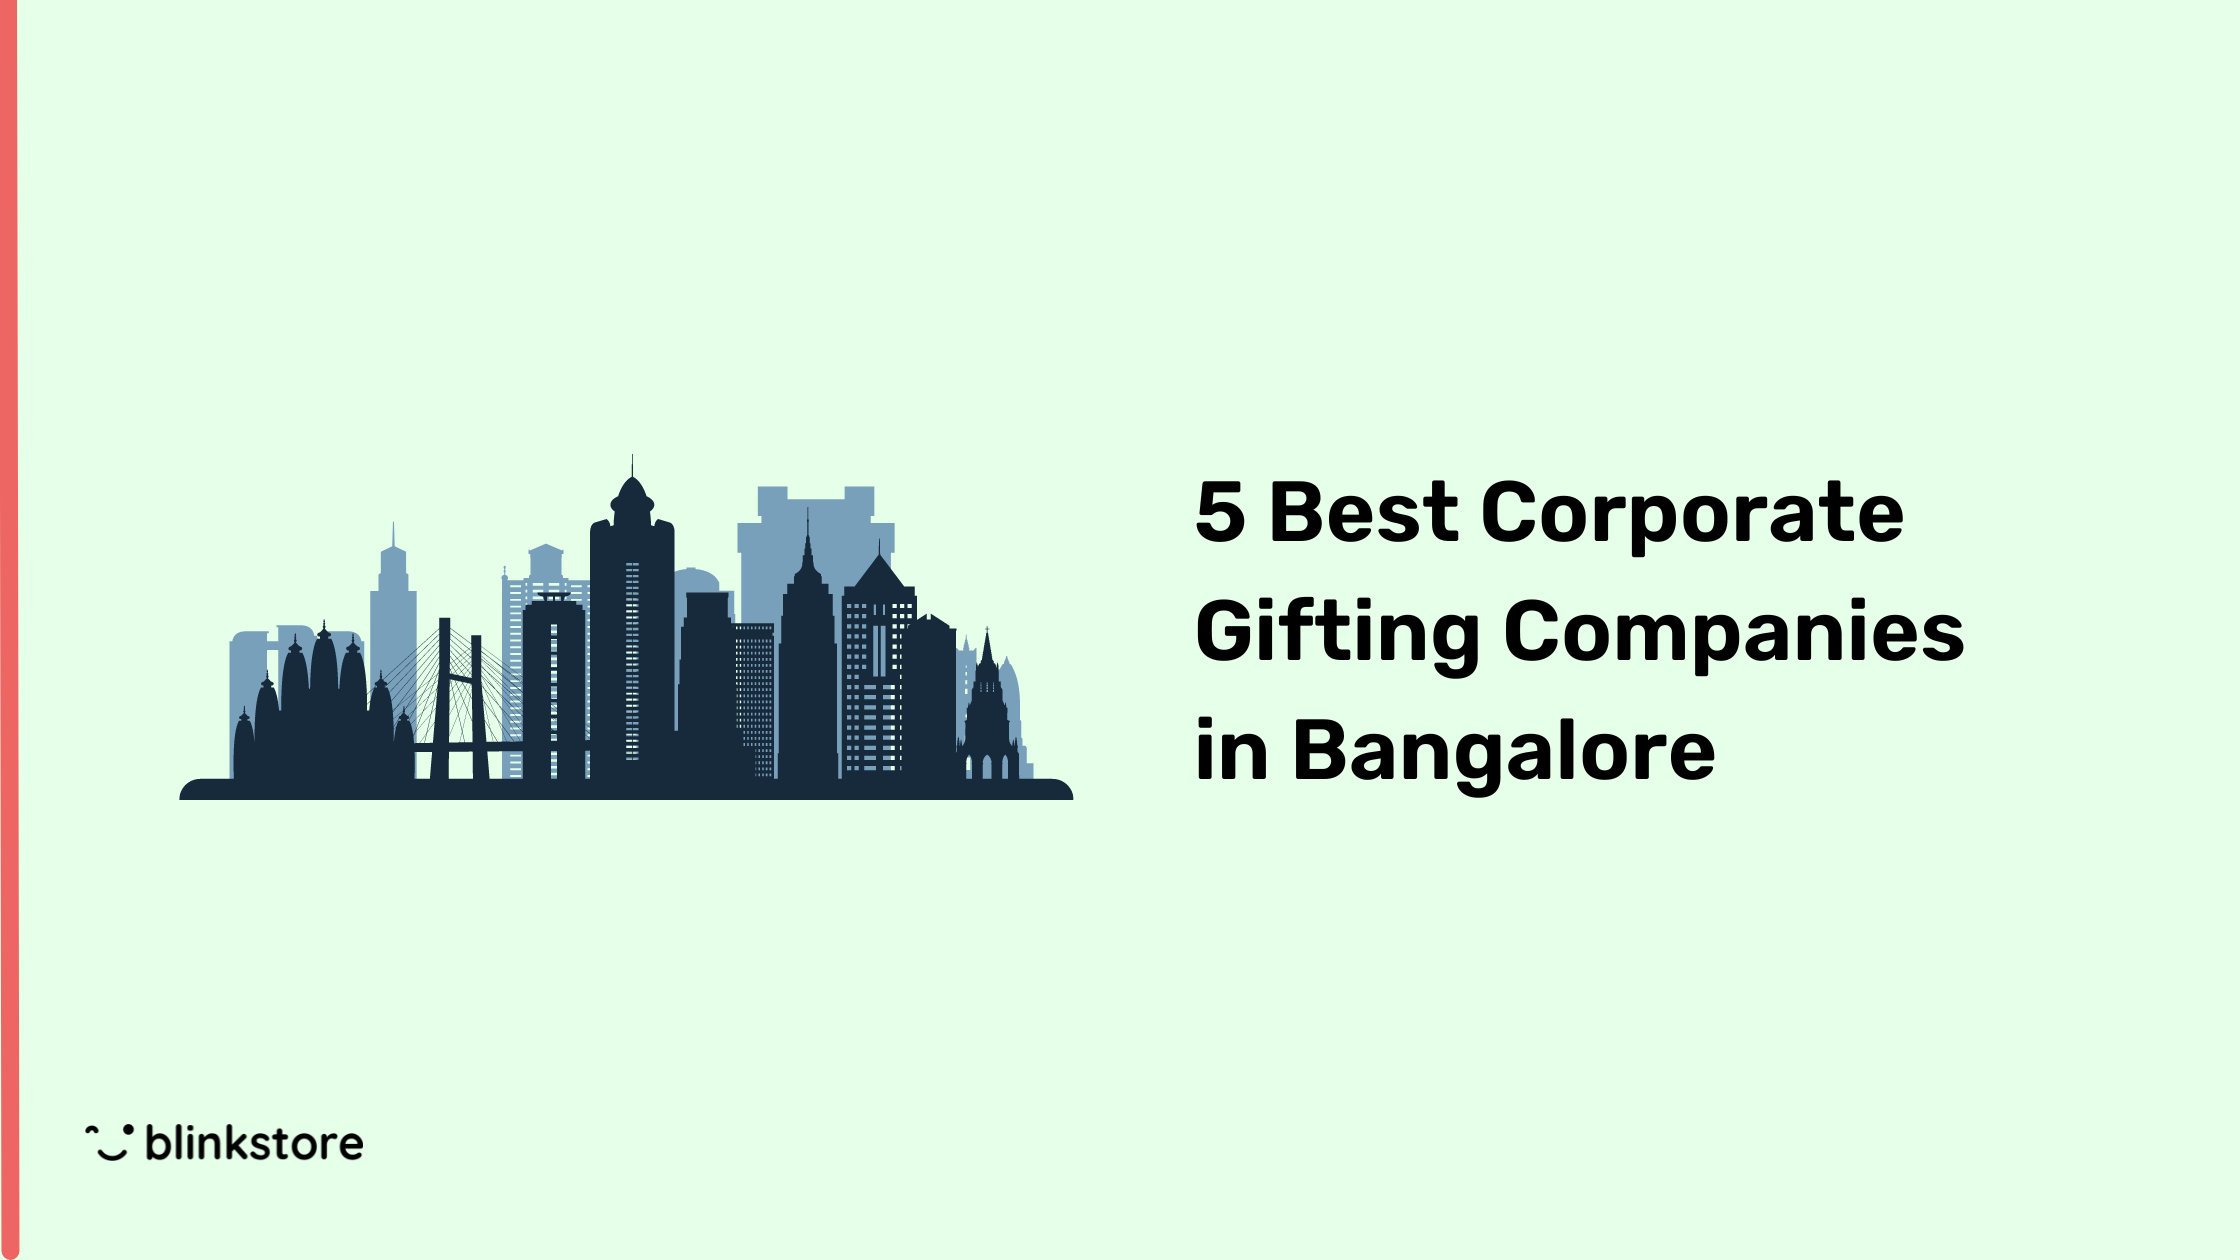 5 Best Corporate Gifting Companies in Bangalore